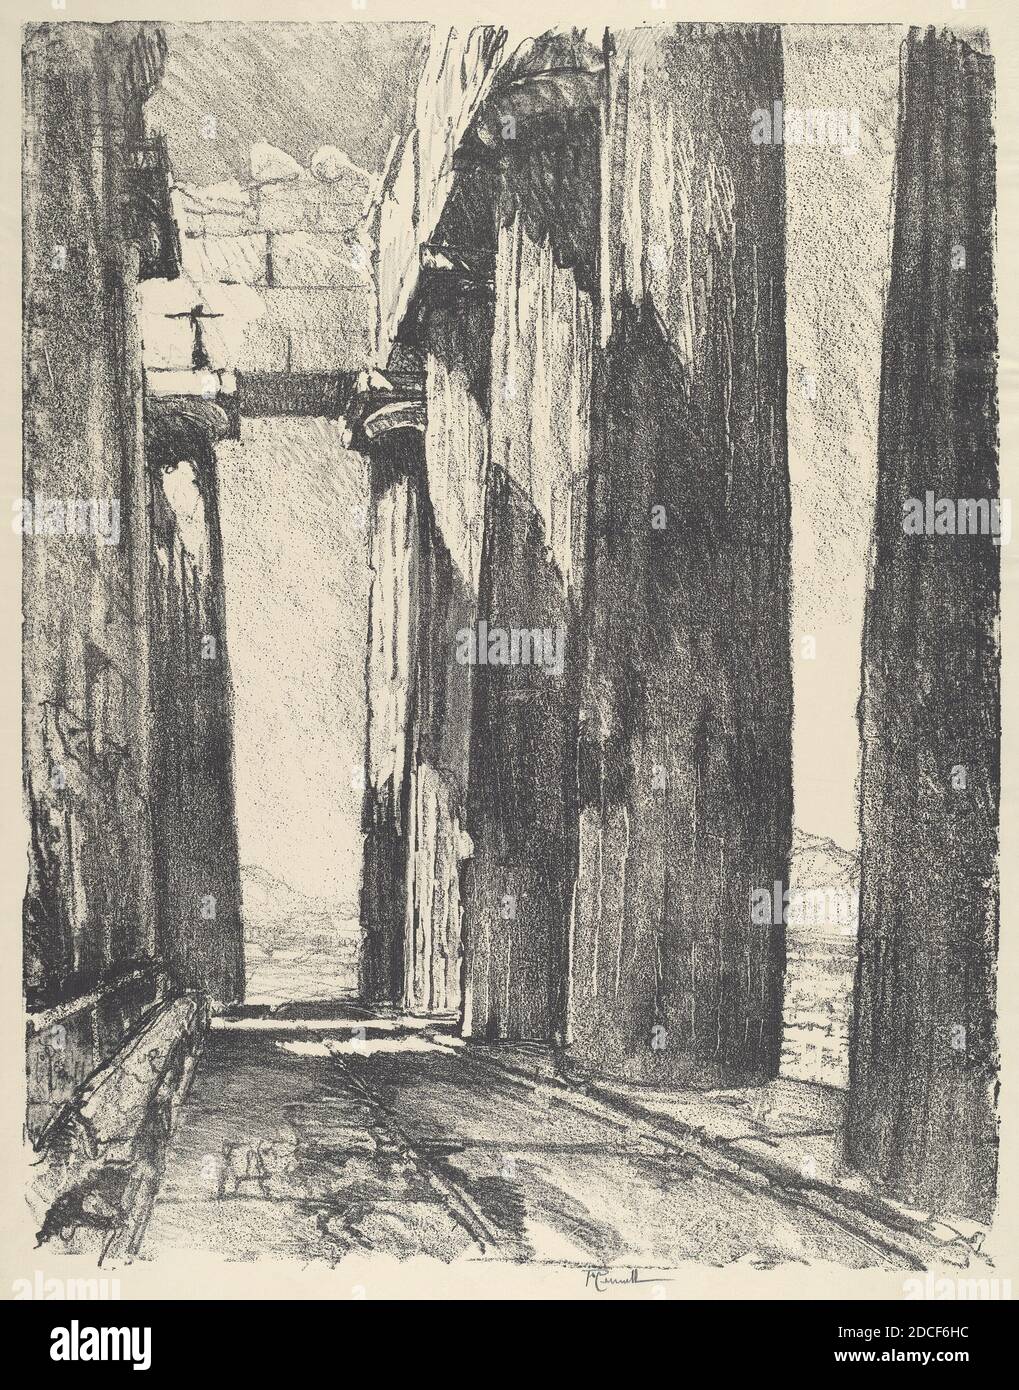 Joseph Pennell, (Künstler), Amerikaner, 1857 - 1926, The Portico of the Parthenon, Land of Temples, (Serie), 1913, Lithographie Stockfoto